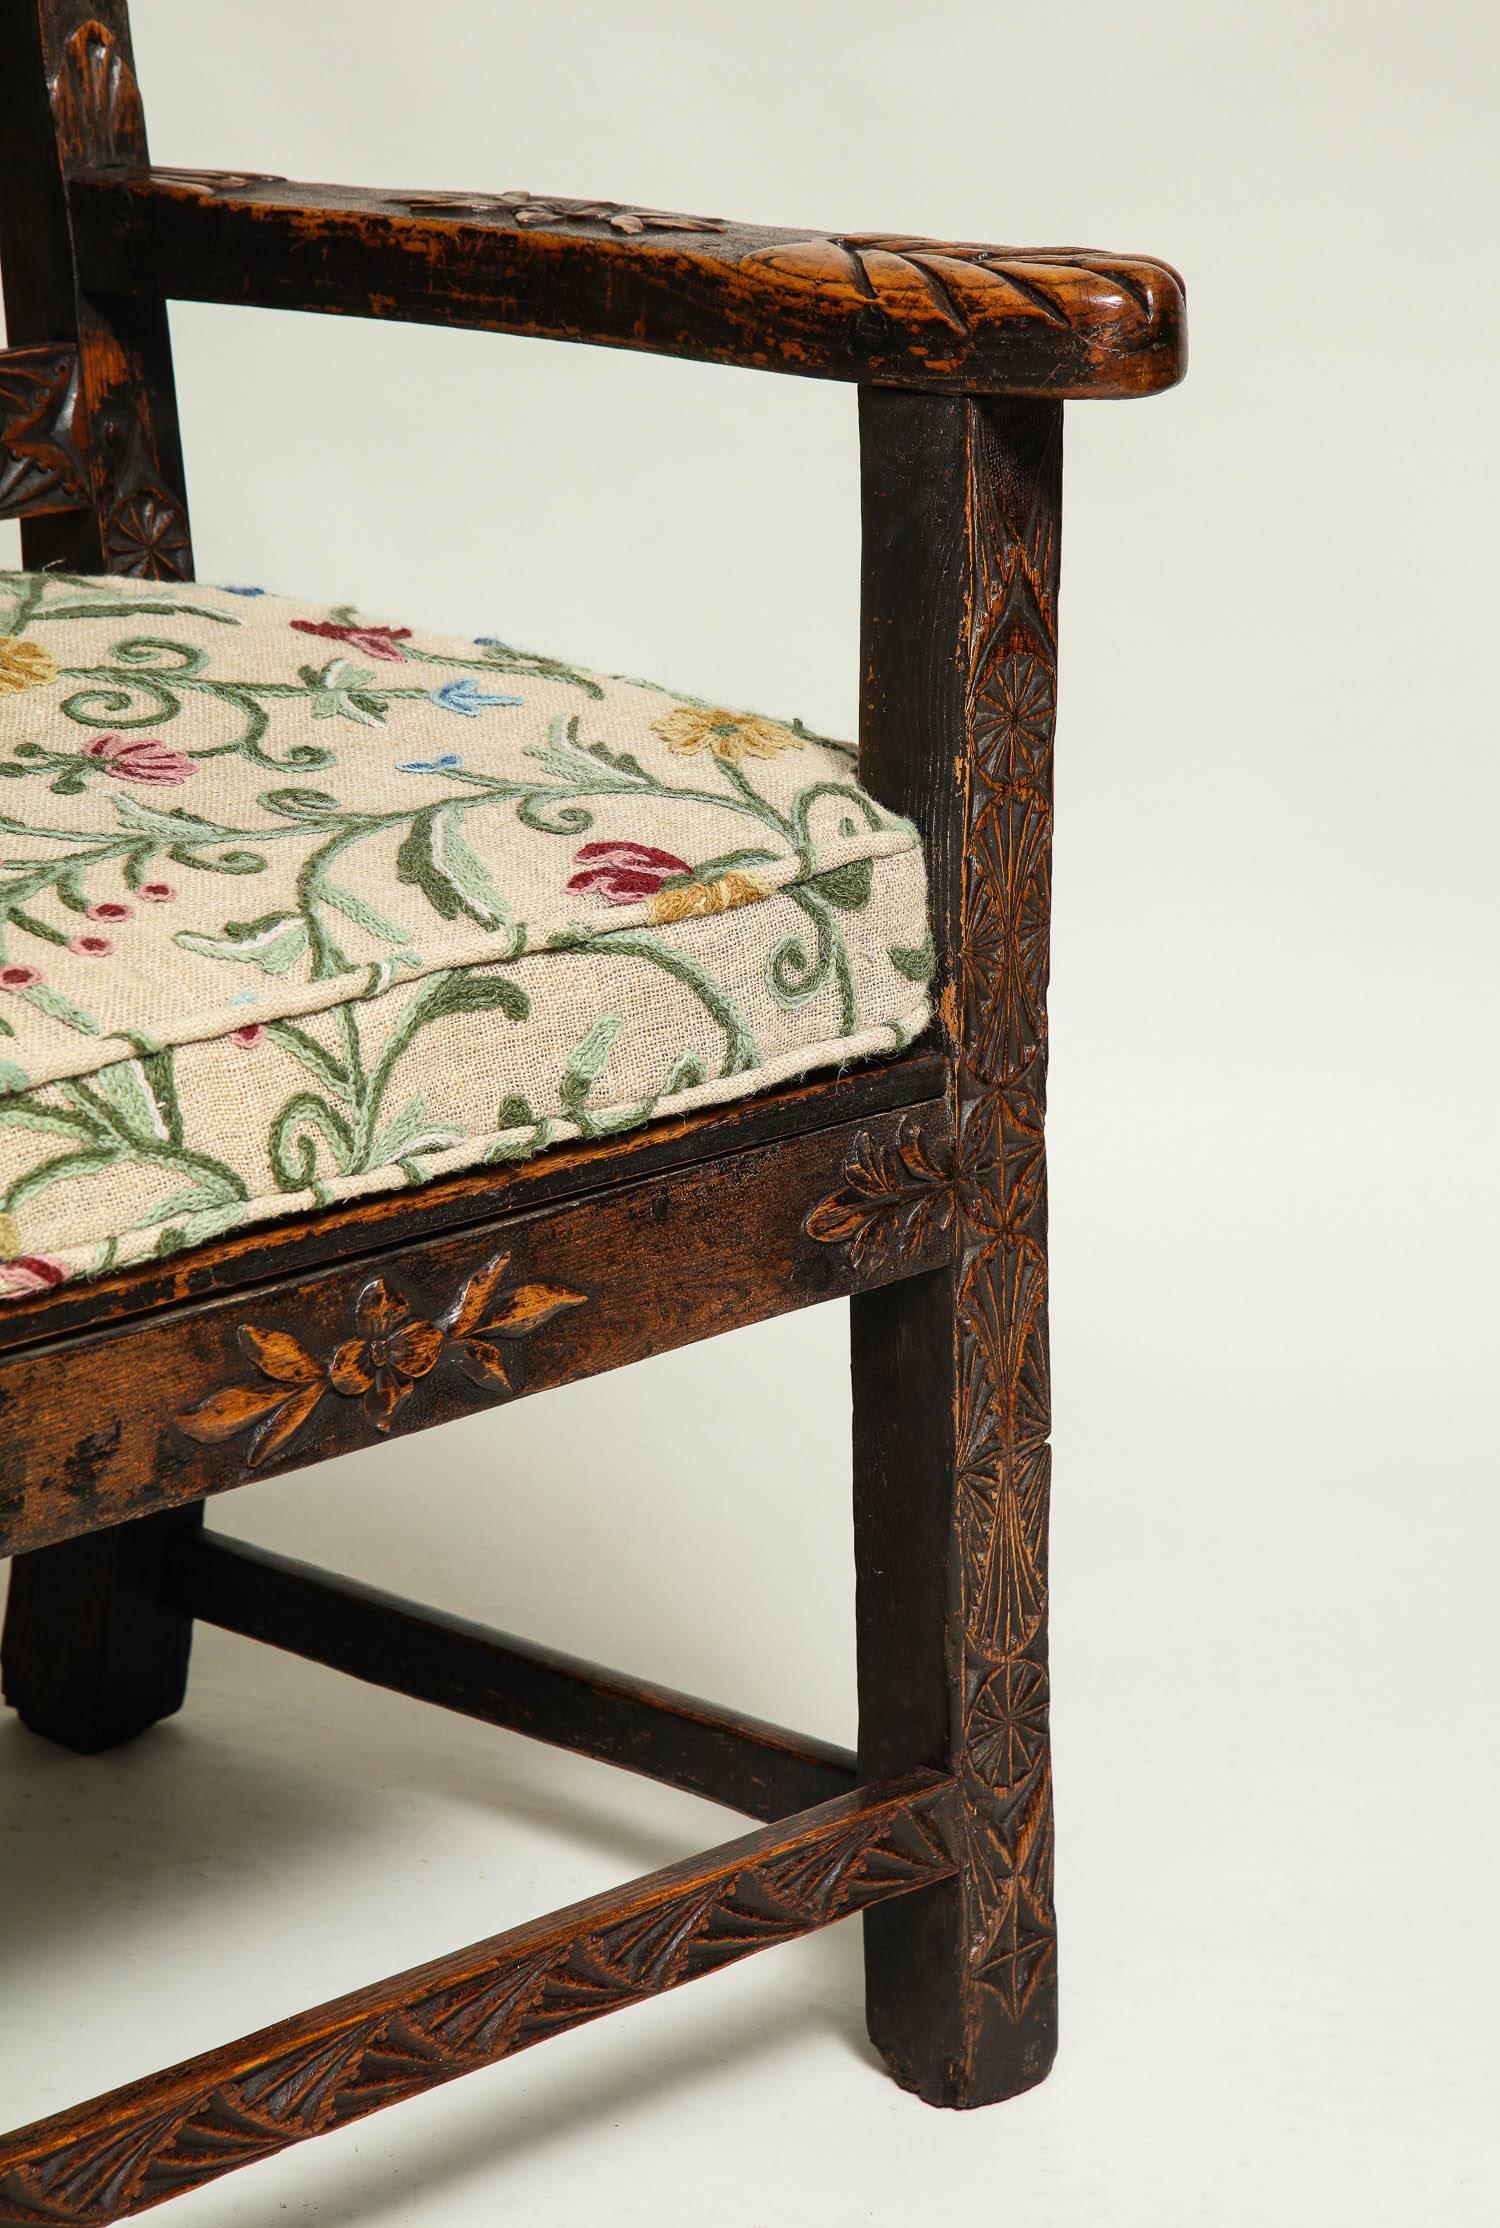 18th Century English Folk Art Chair In Excellent Condition For Sale In Greenwich, CT